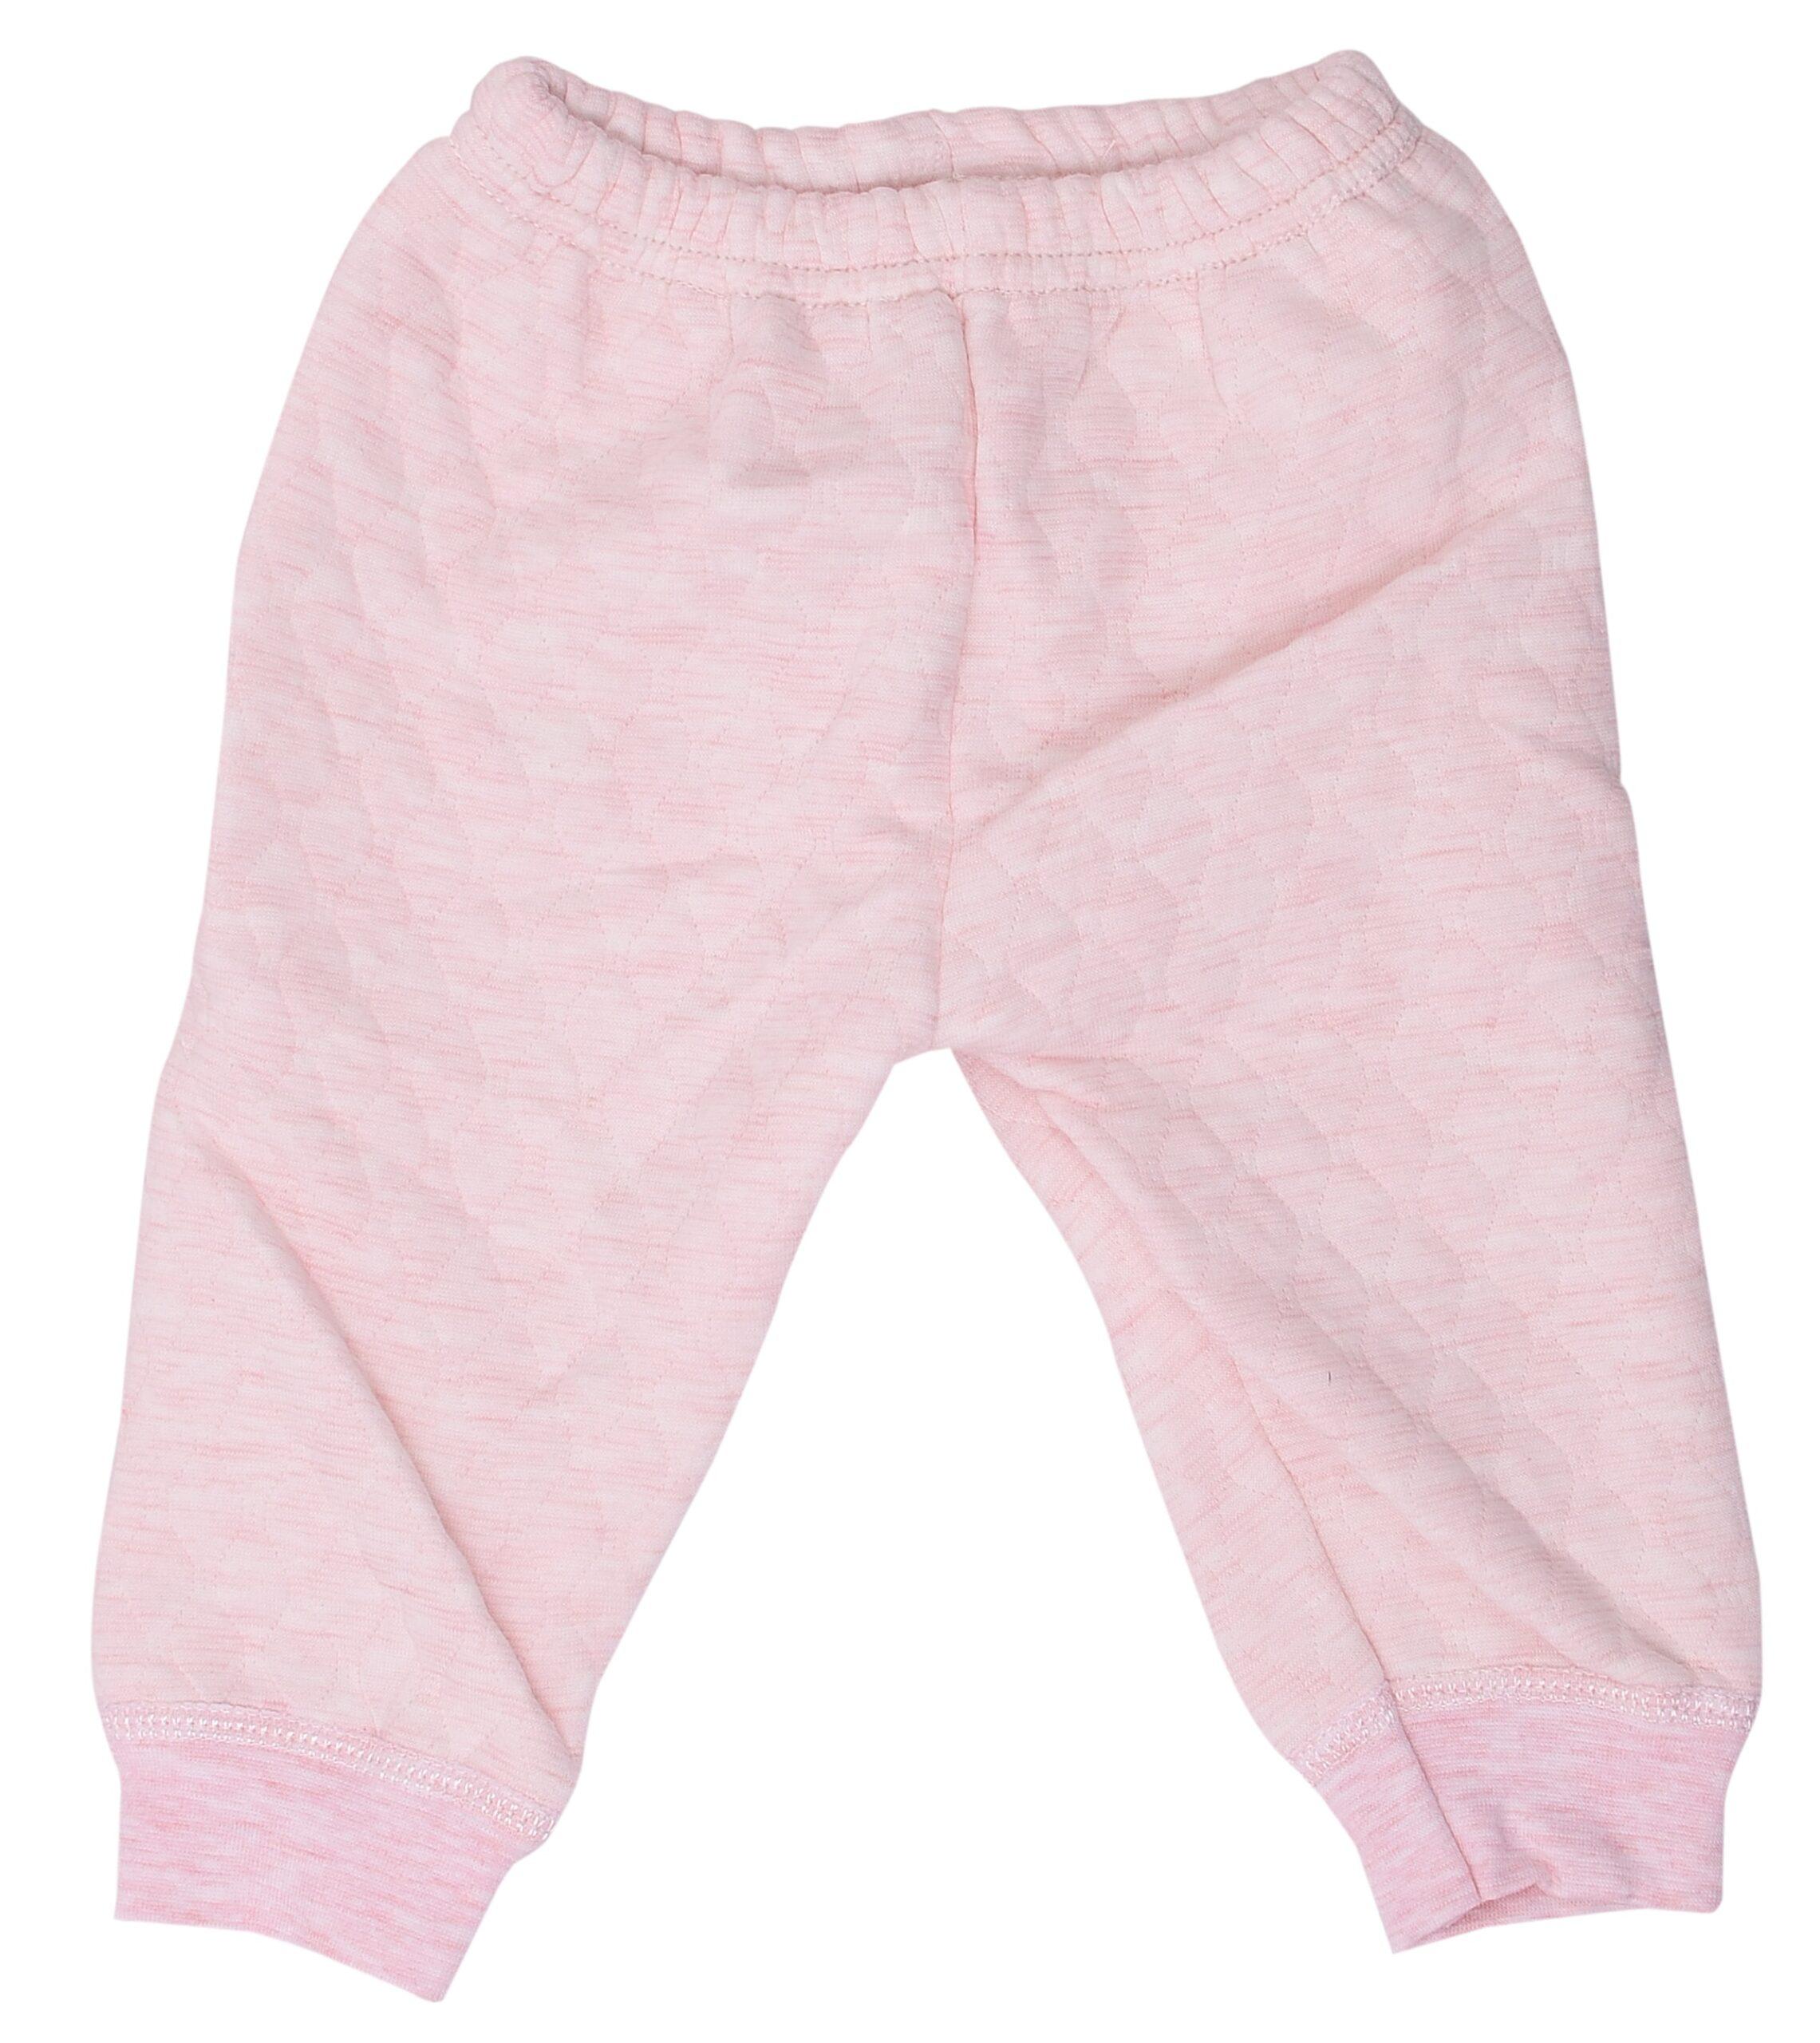 Baby's Warm Unisex Cotton Pant and Shirt Set - Pink